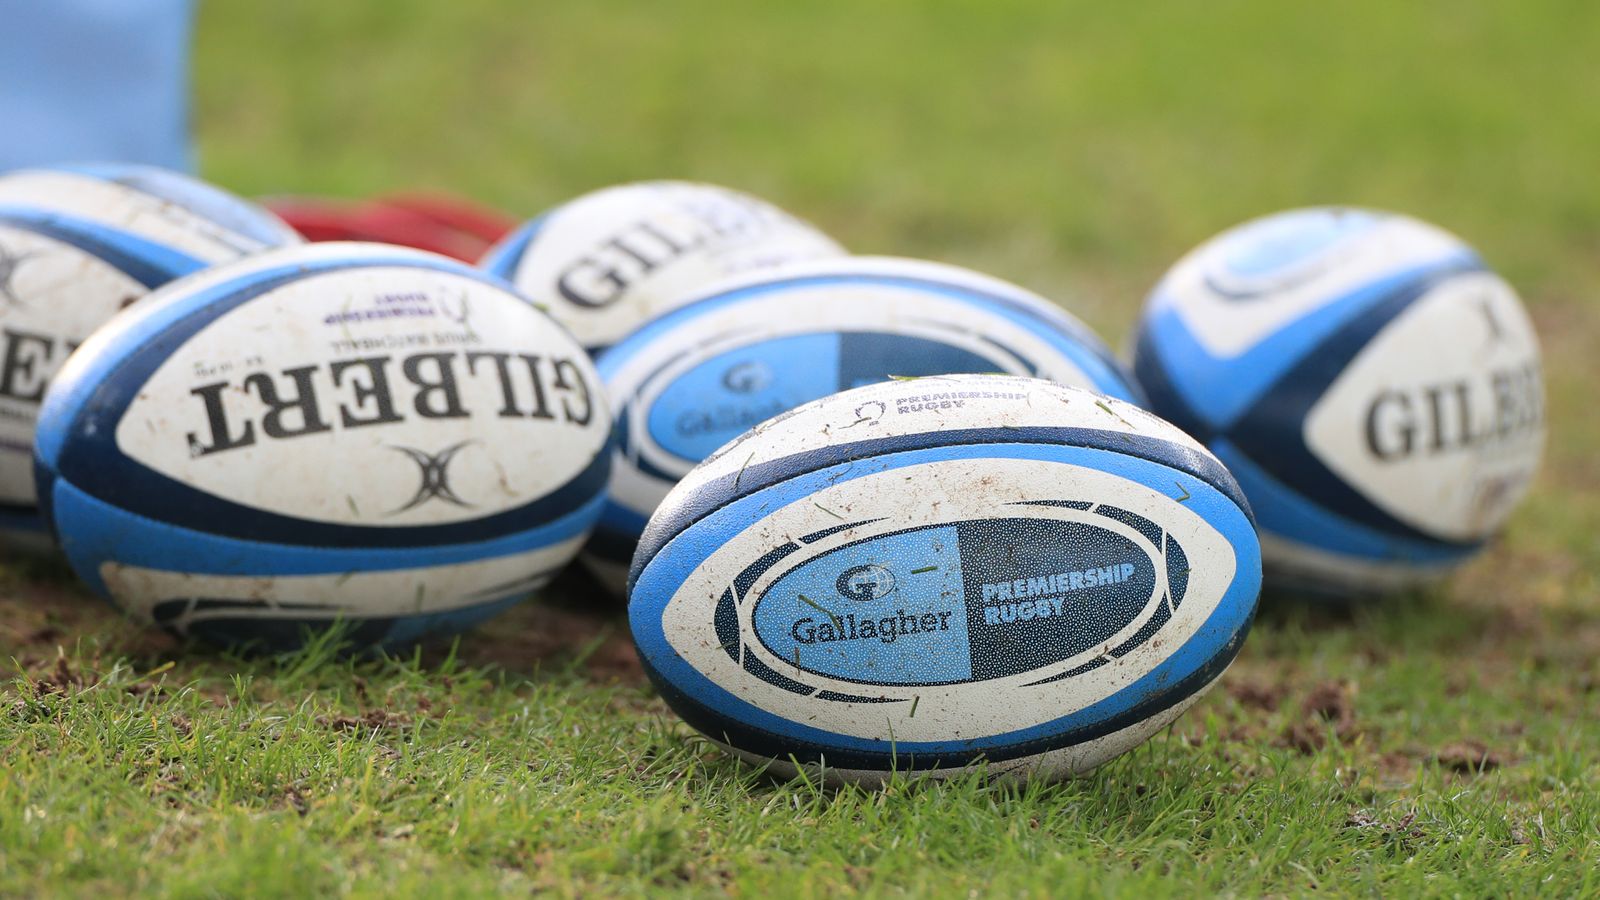 Premiership Rugby clubs to benefit from £88m loan from government to finish 2020/21 season